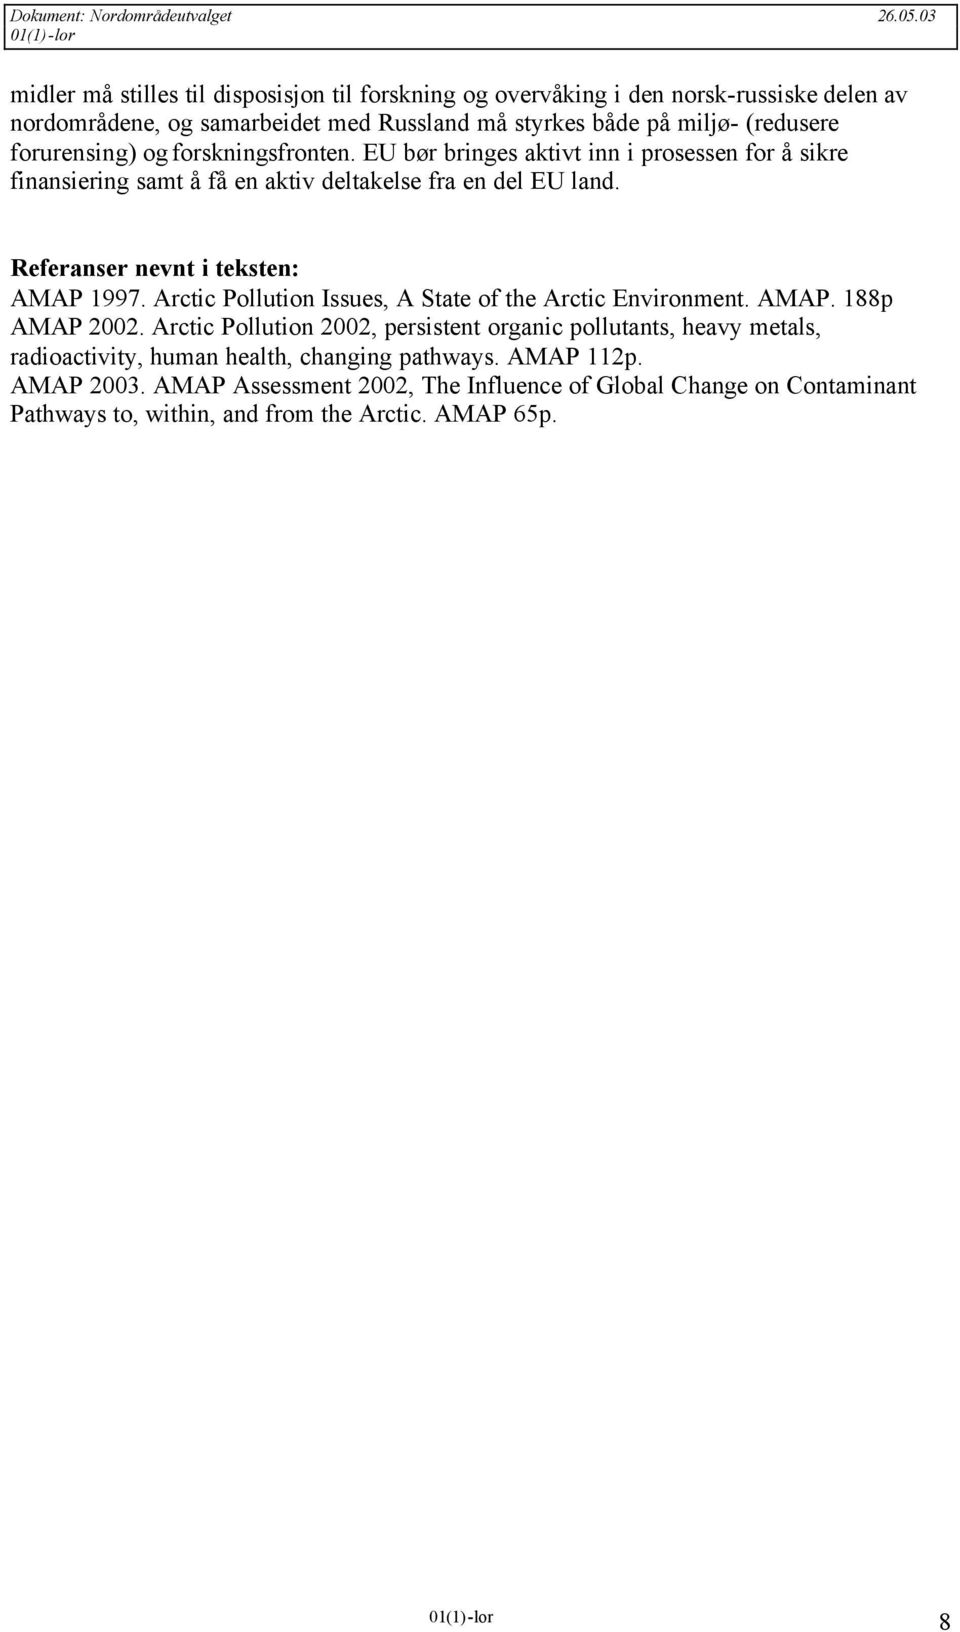 Referanser nevnt i teksten: AMAP 1997. Arctic Pollution Issues, A State of the Arctic Environment. AMAP. 188p AMAP 2002.